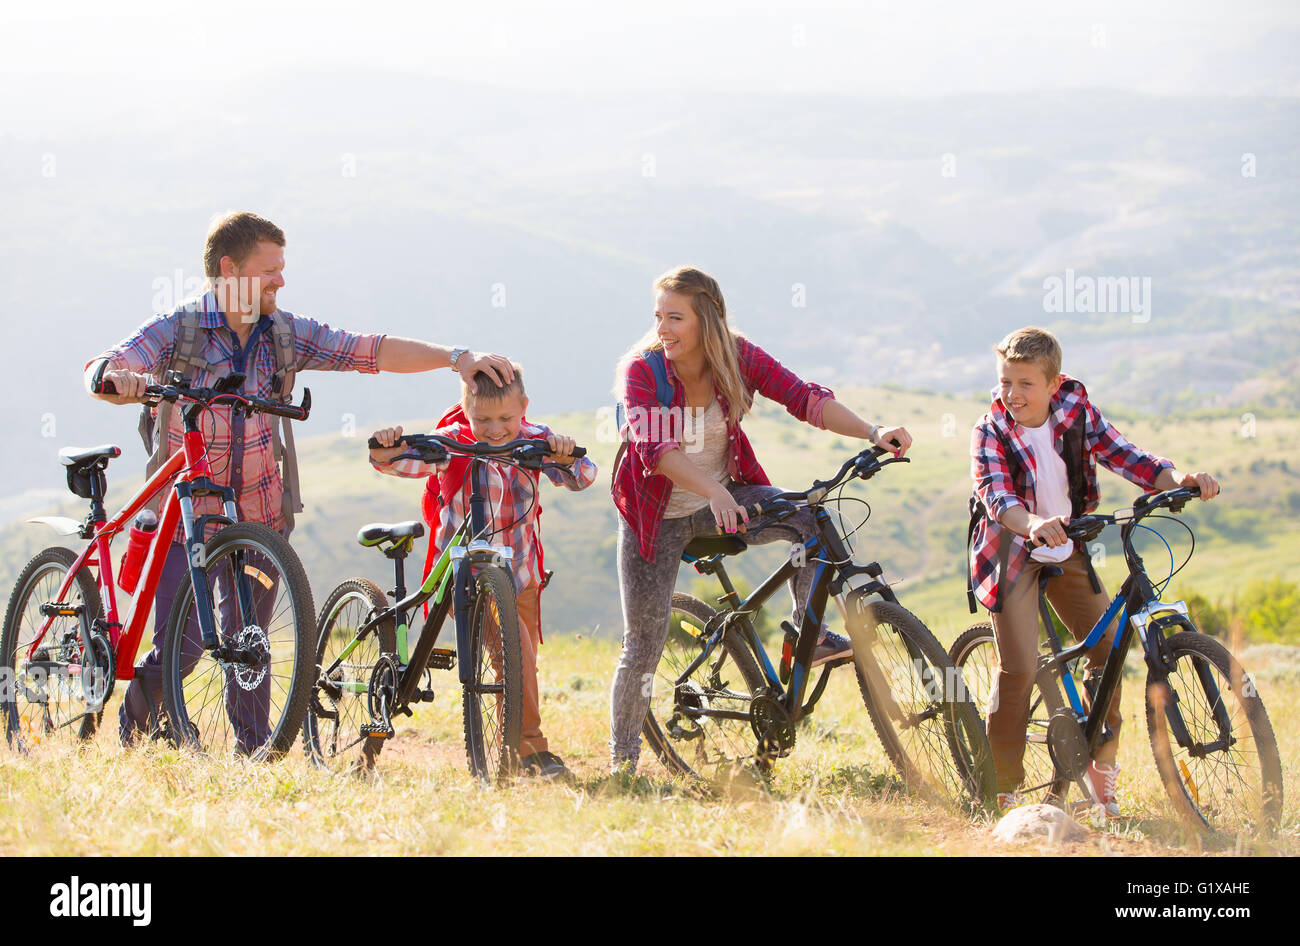 Family of four people riding bikes in the mountains Stock Photo